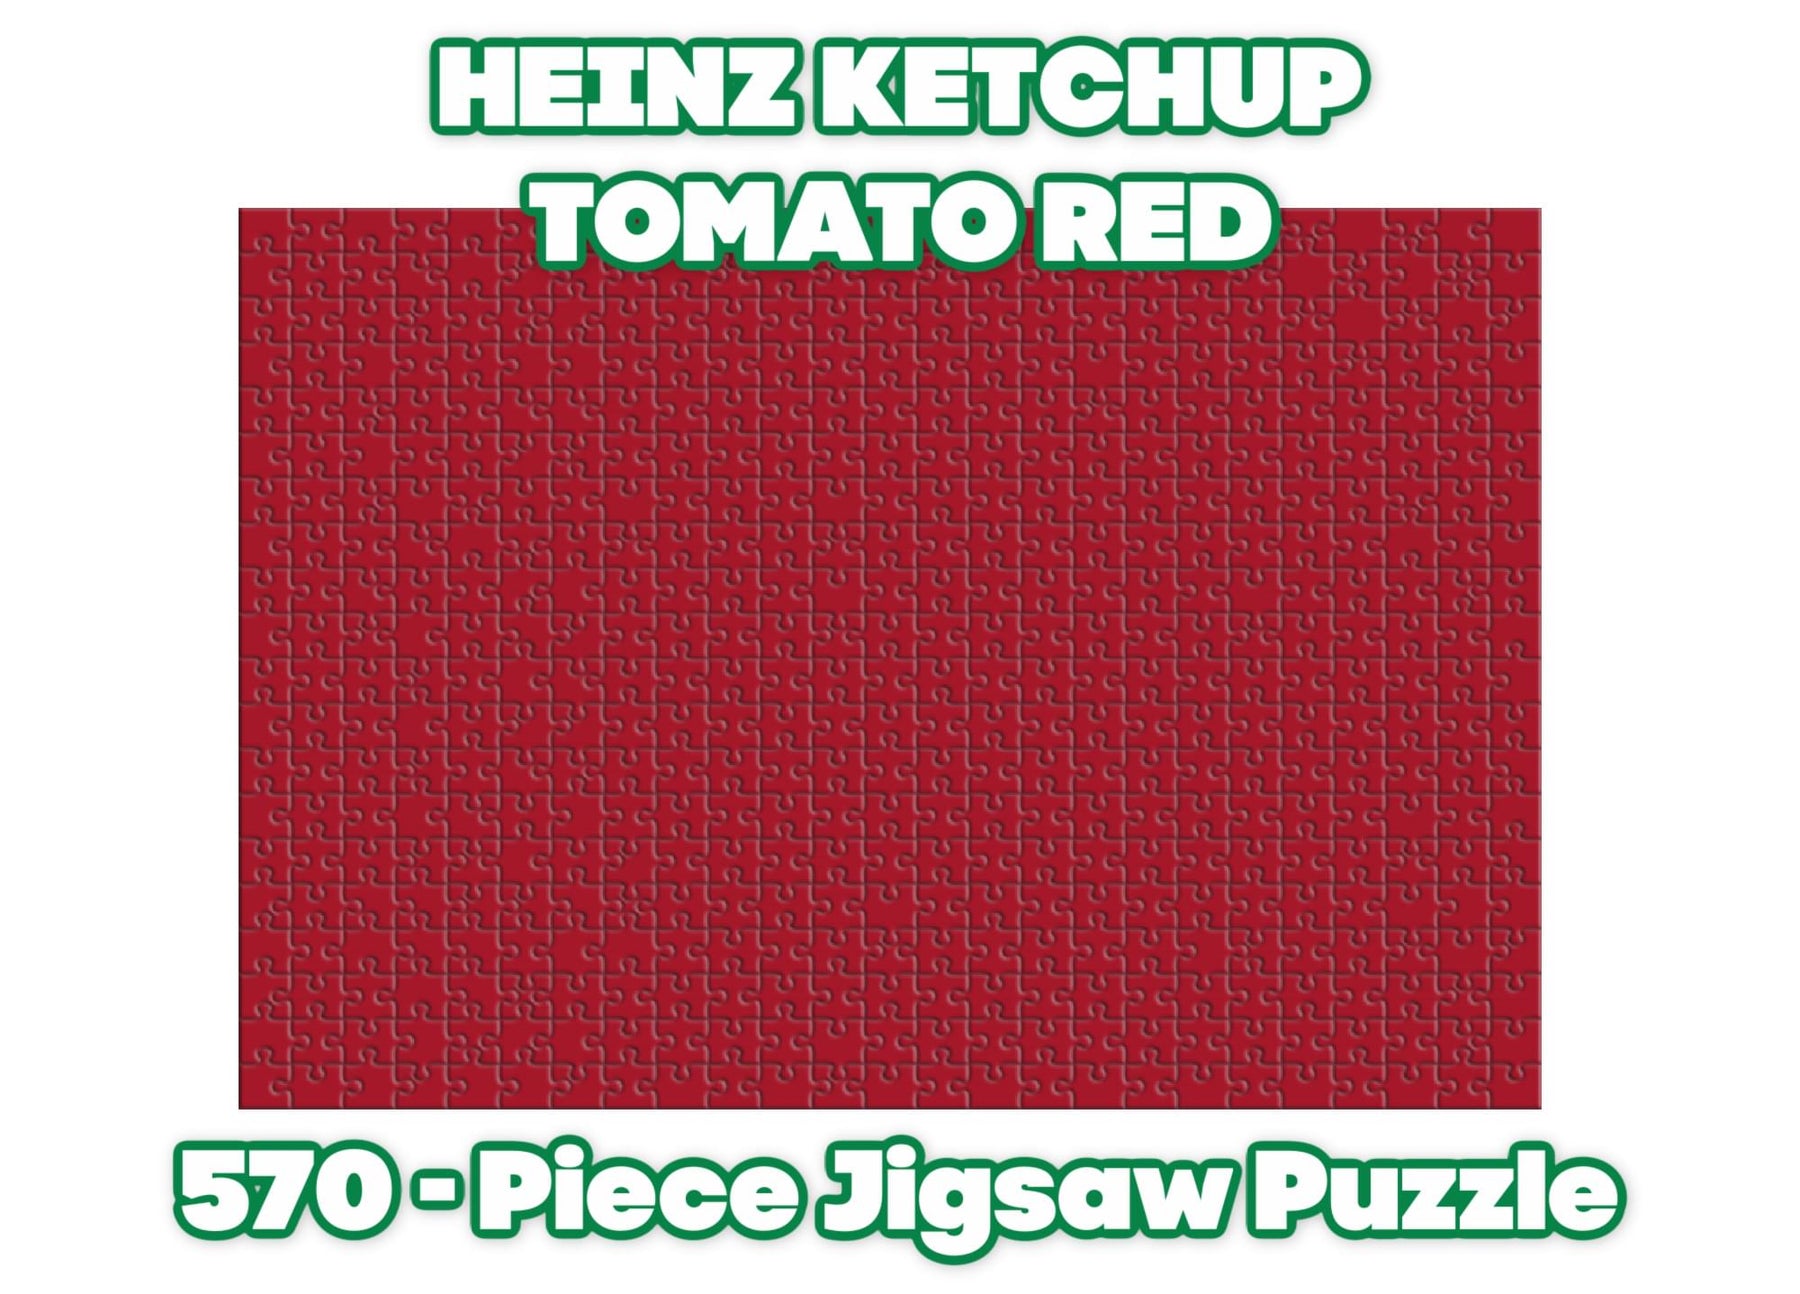 Heinz Ketchup All-Red Food Puzzle For Adults And Kids | 570 Piece Jigsaw Puzzle